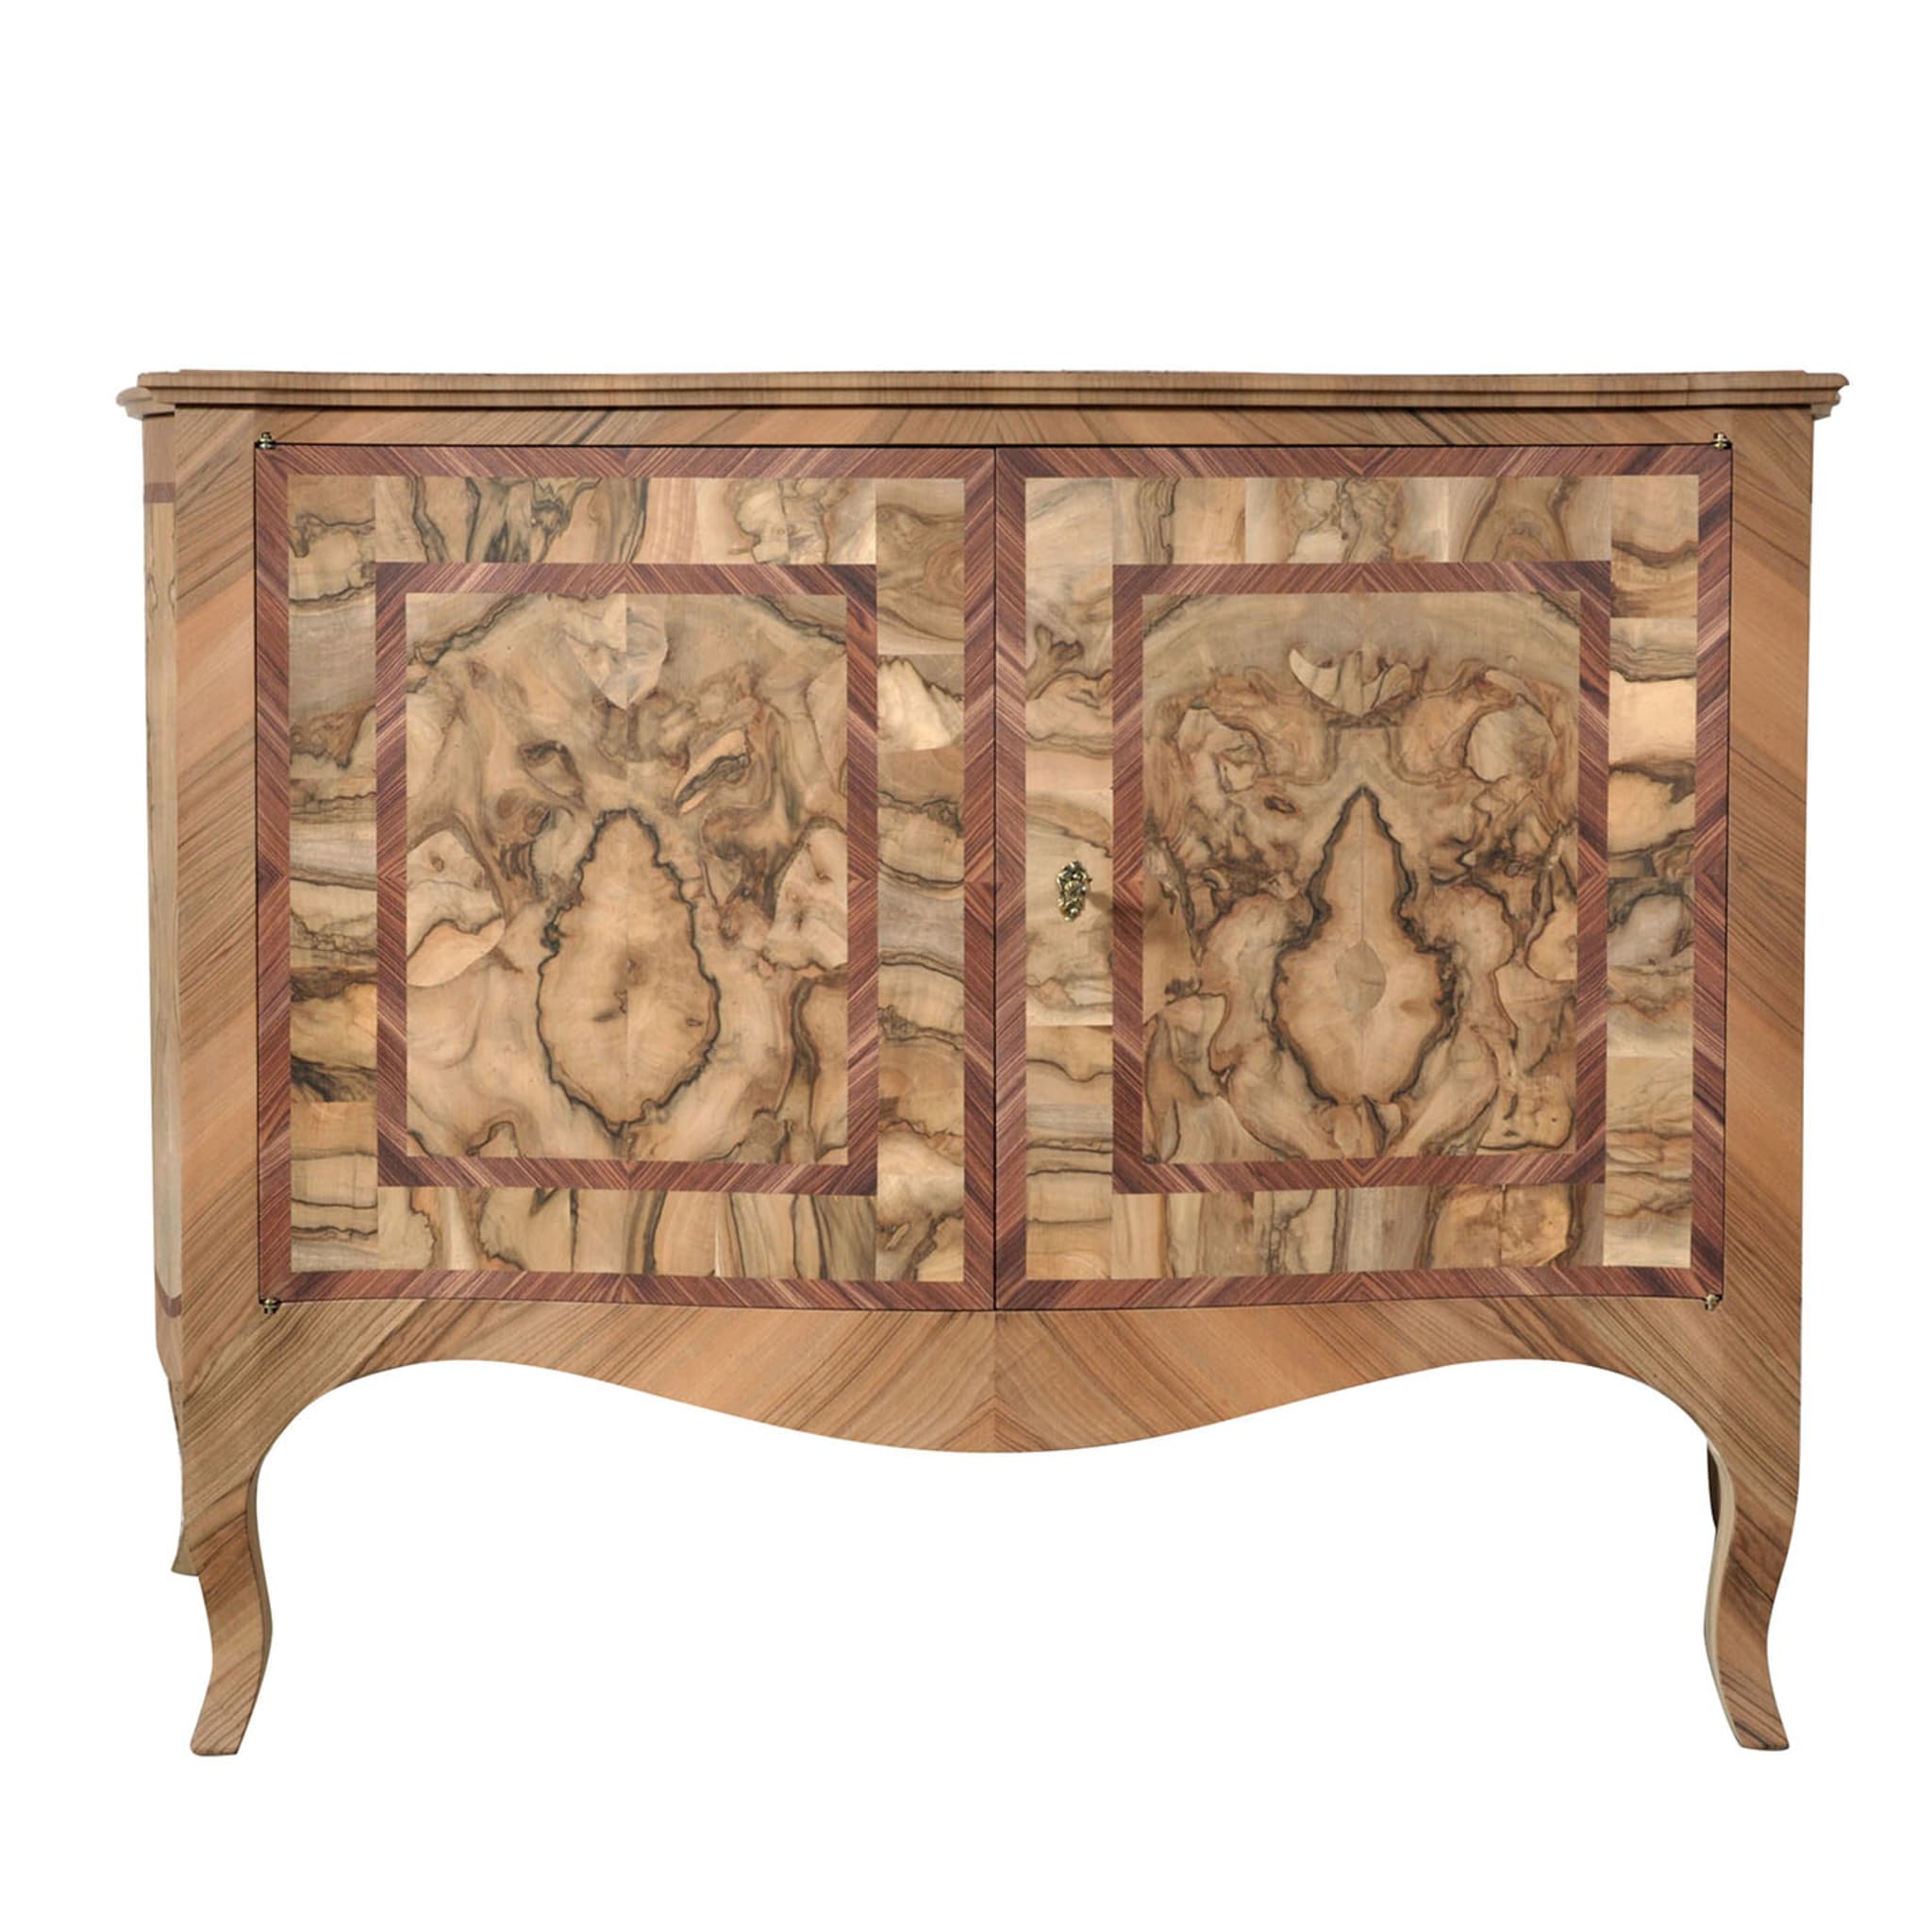 Emiliano '600 Inlaid Walnut and Rosewood Sideboard - Main view